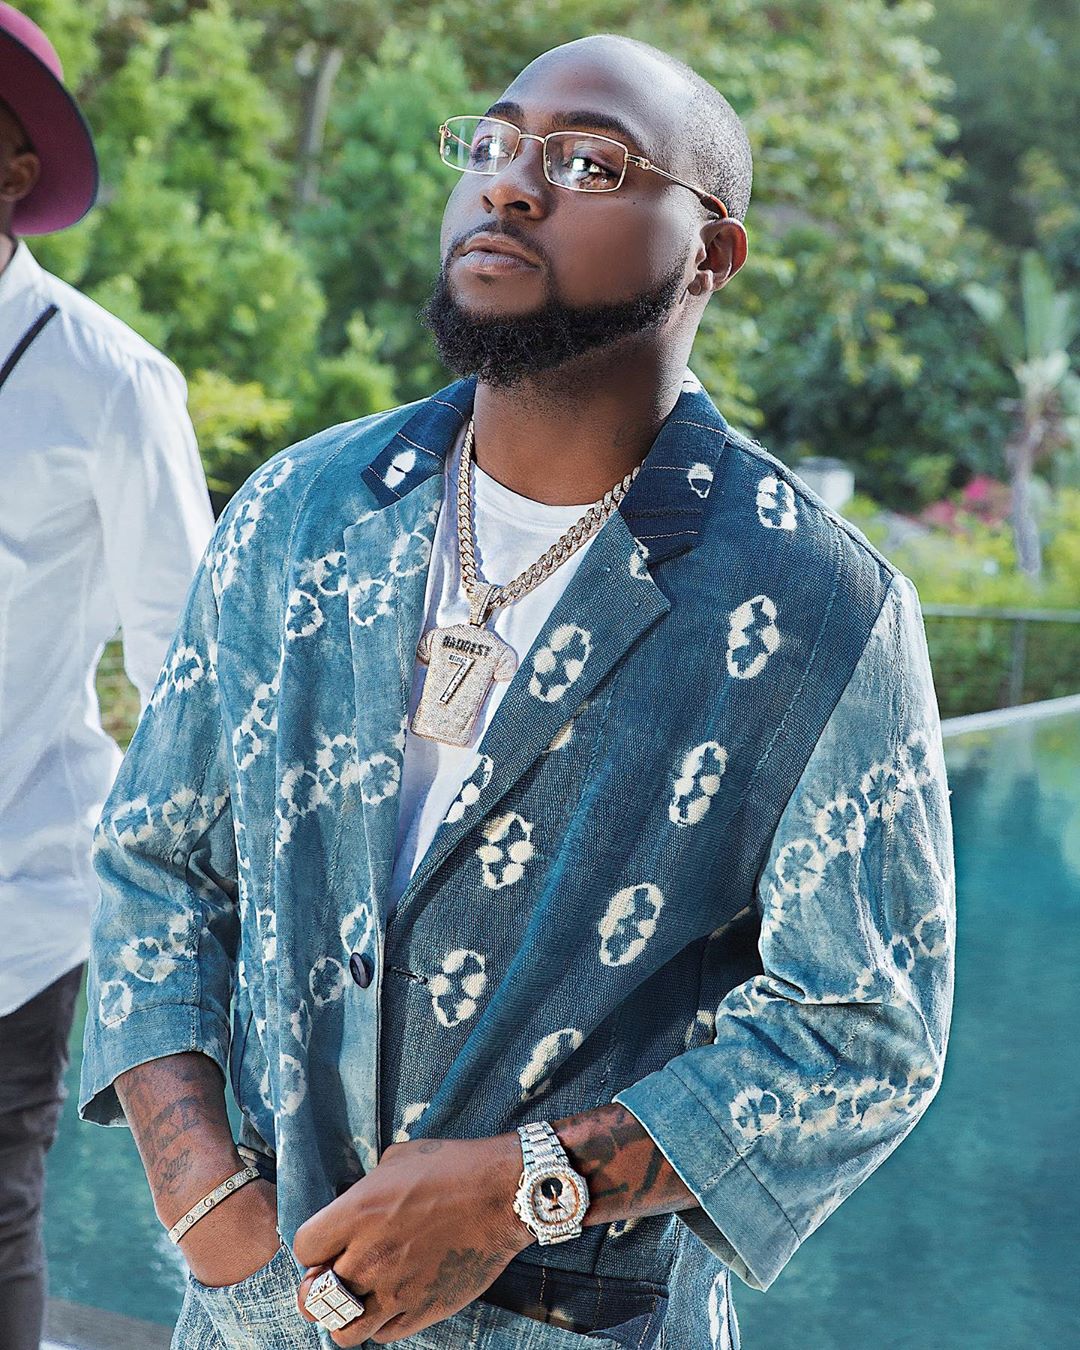 ‘I have the biggest record label in Africa’ – Davido boasts